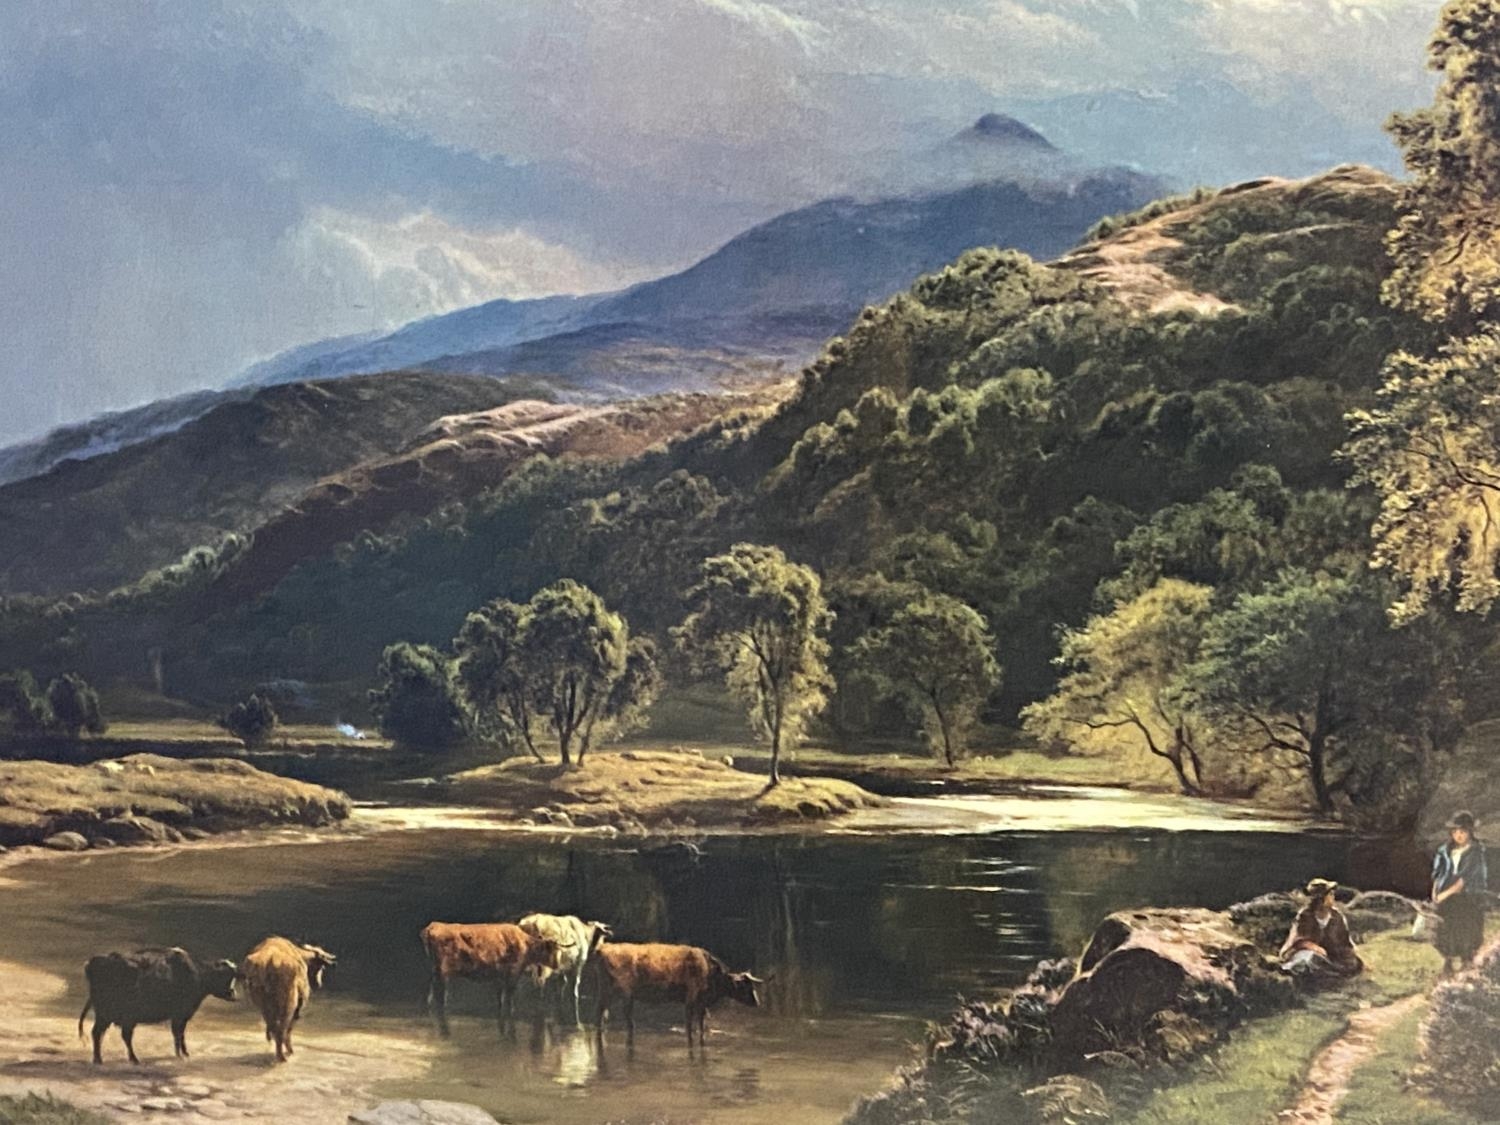 Framed & glazed print of a Highland Scene, 54 x 73cm, frame loose from picture - Image 2 of 2